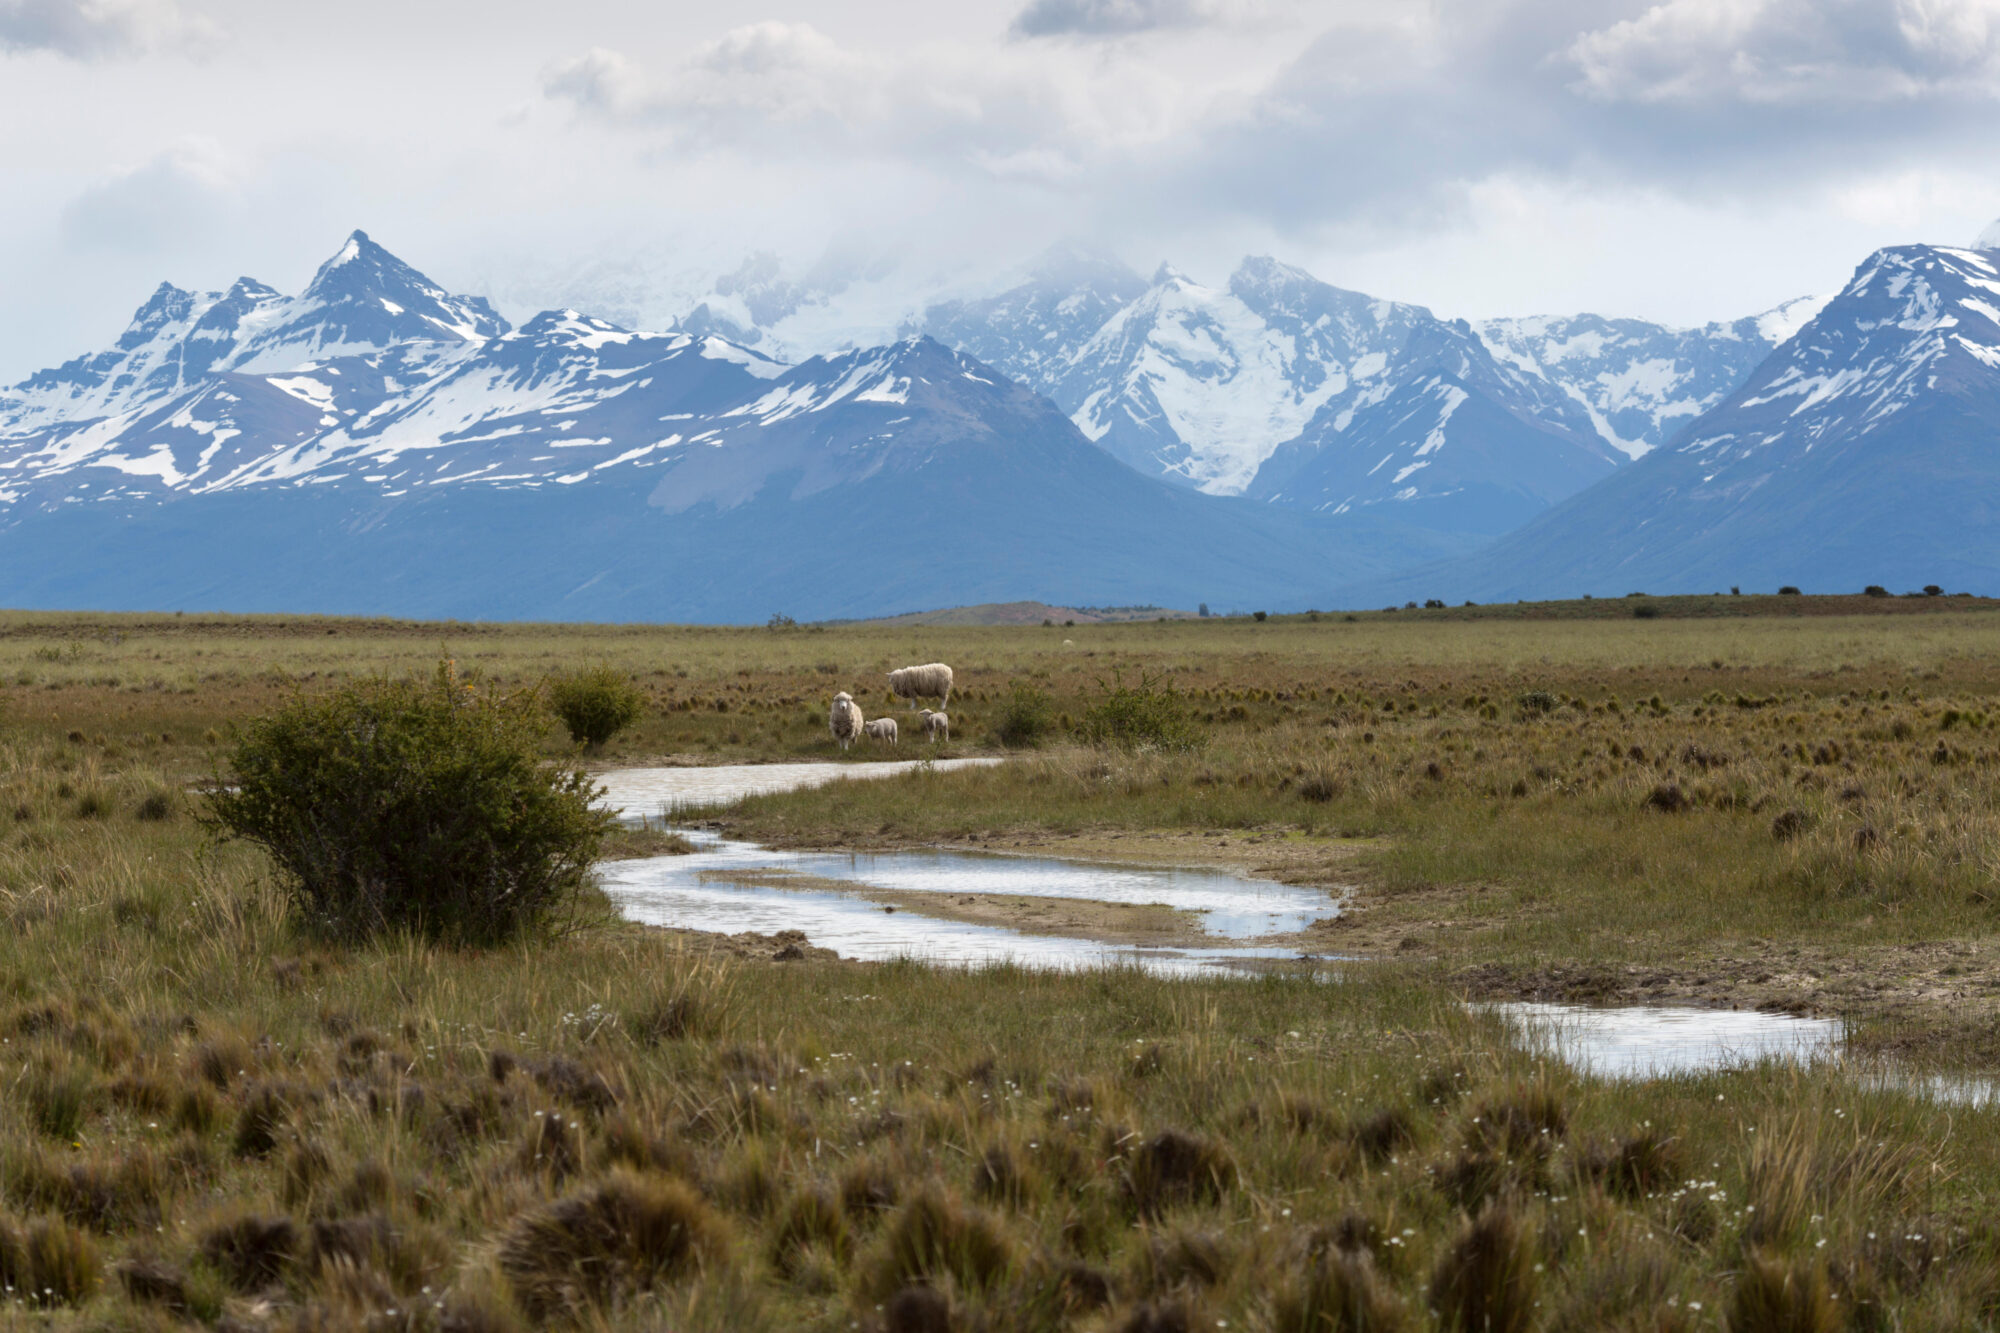 River and sheep below the Andes mountain range in El Calafate, Argentina